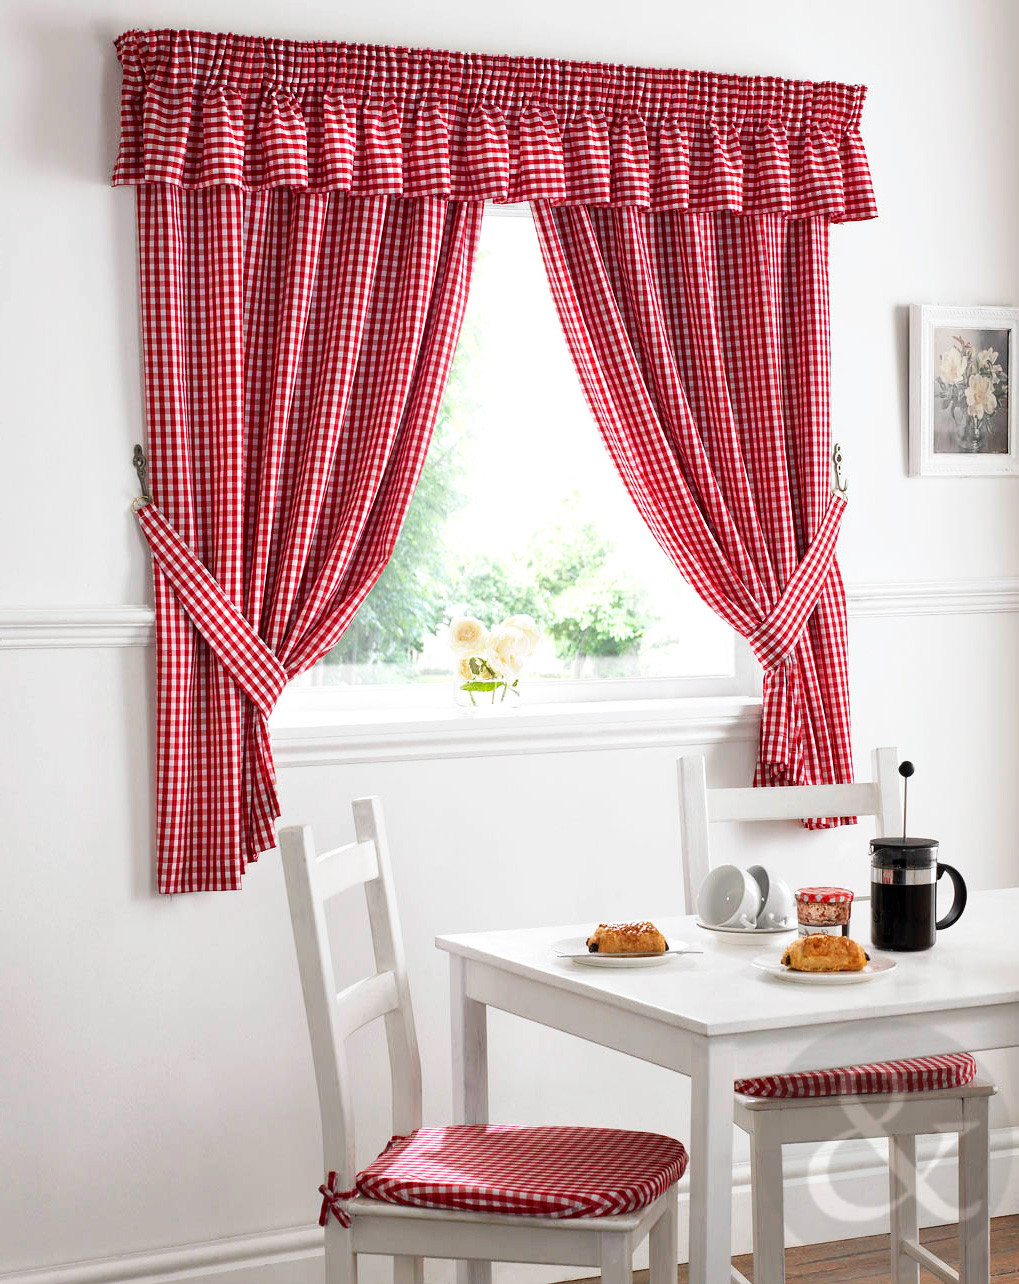 Penny'S Kitchen Curtains
 Gingham Check Kitchen Curtains Ready Made Pencil Pleat Net